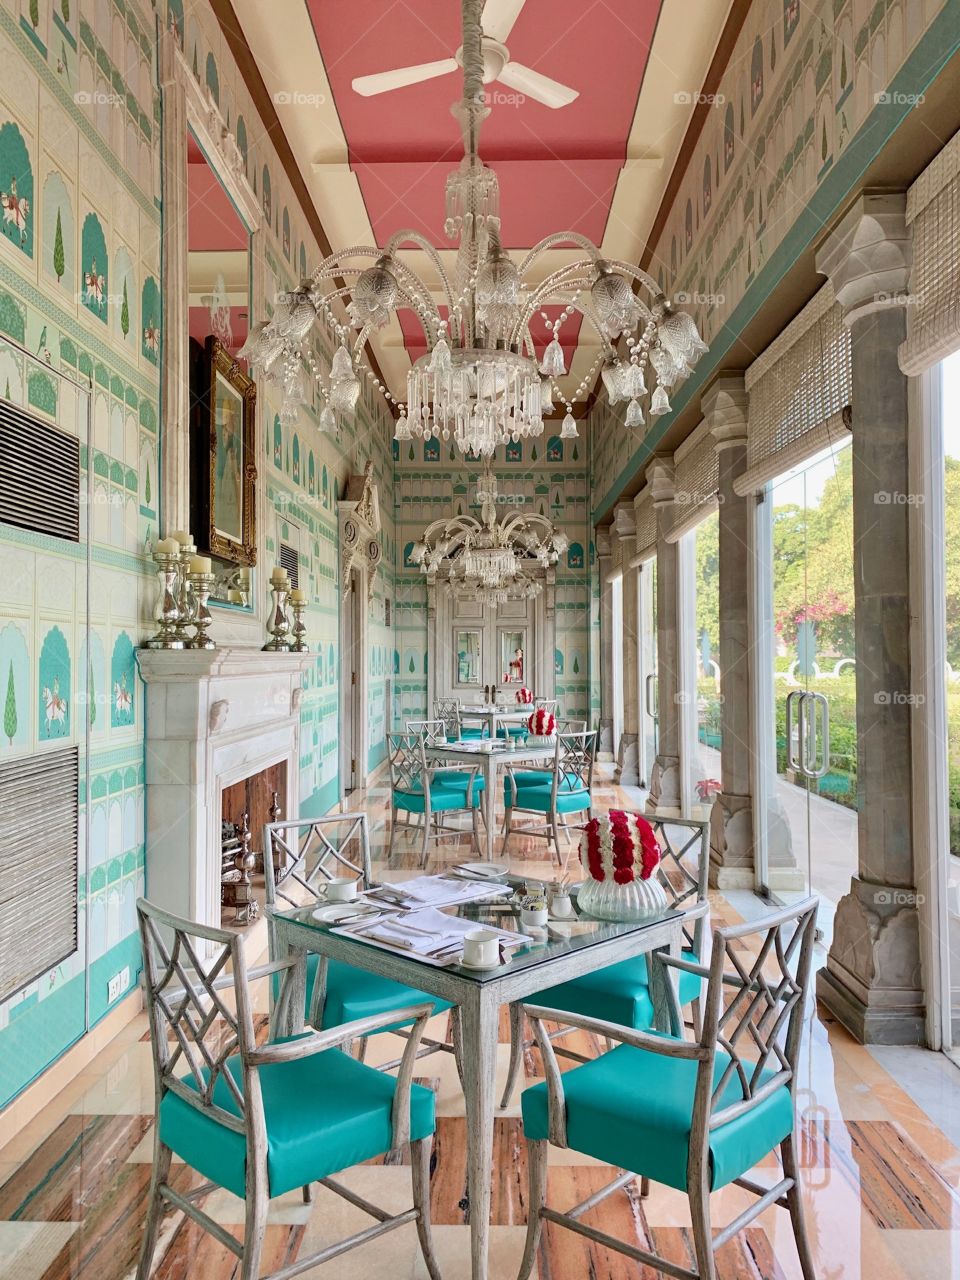 Jaipur India Luxury Hotel with Stunning Teal Color Scheme